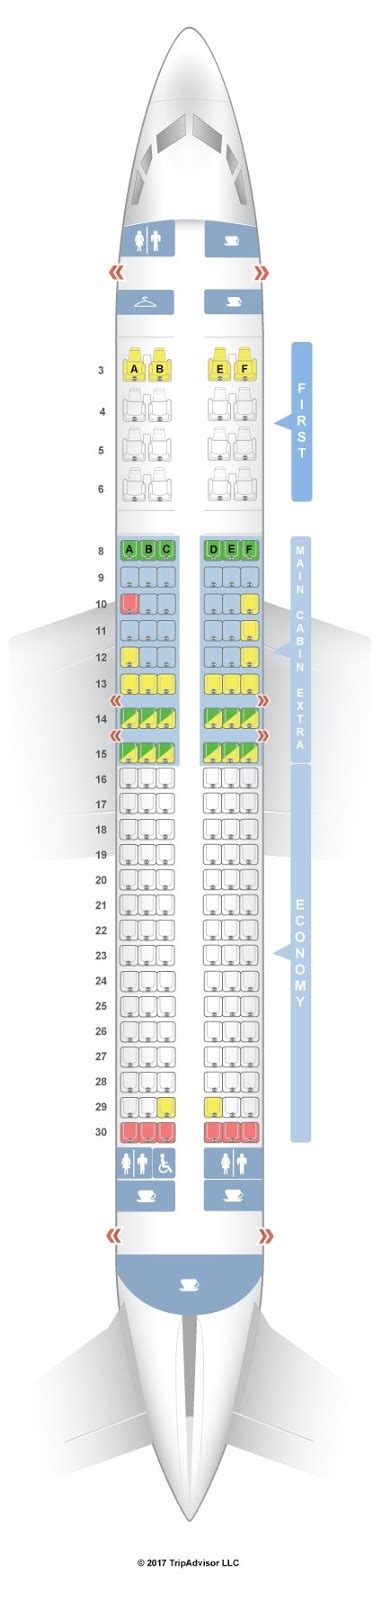 Boeing 737-800 (738) Layout 2. . American airlines seat map